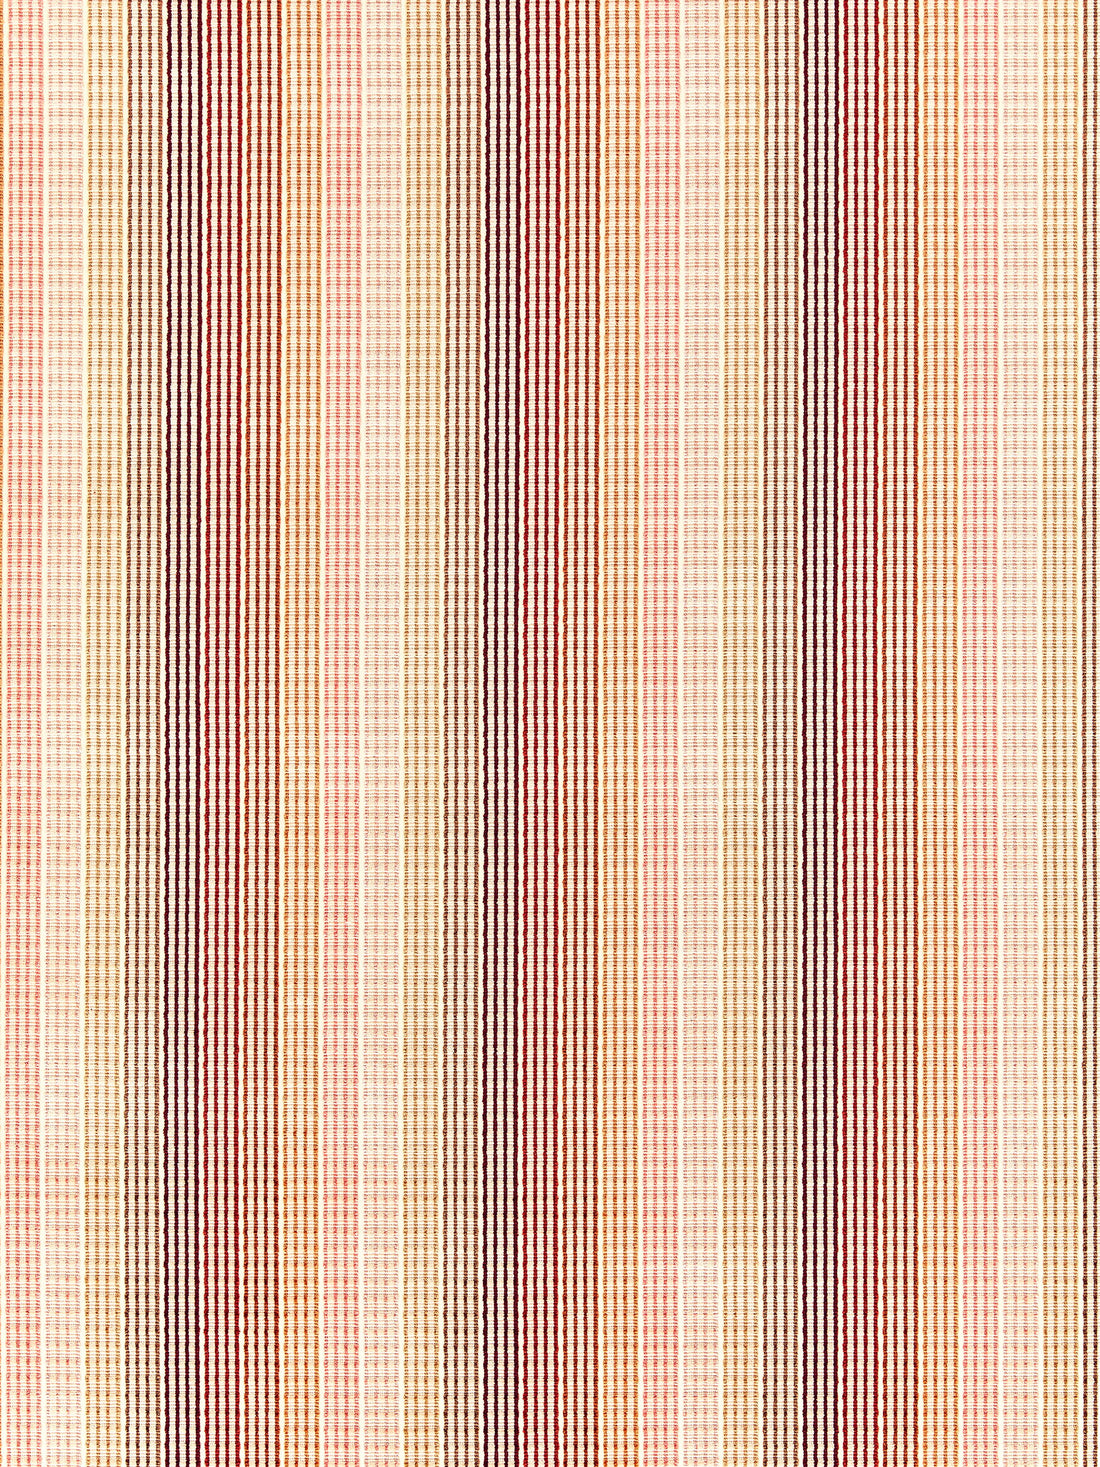 Anderson Velvet Stripe fabric in rosewood color - pattern number GW 000327244 - by Scalamandre in the Grey Watkins collection